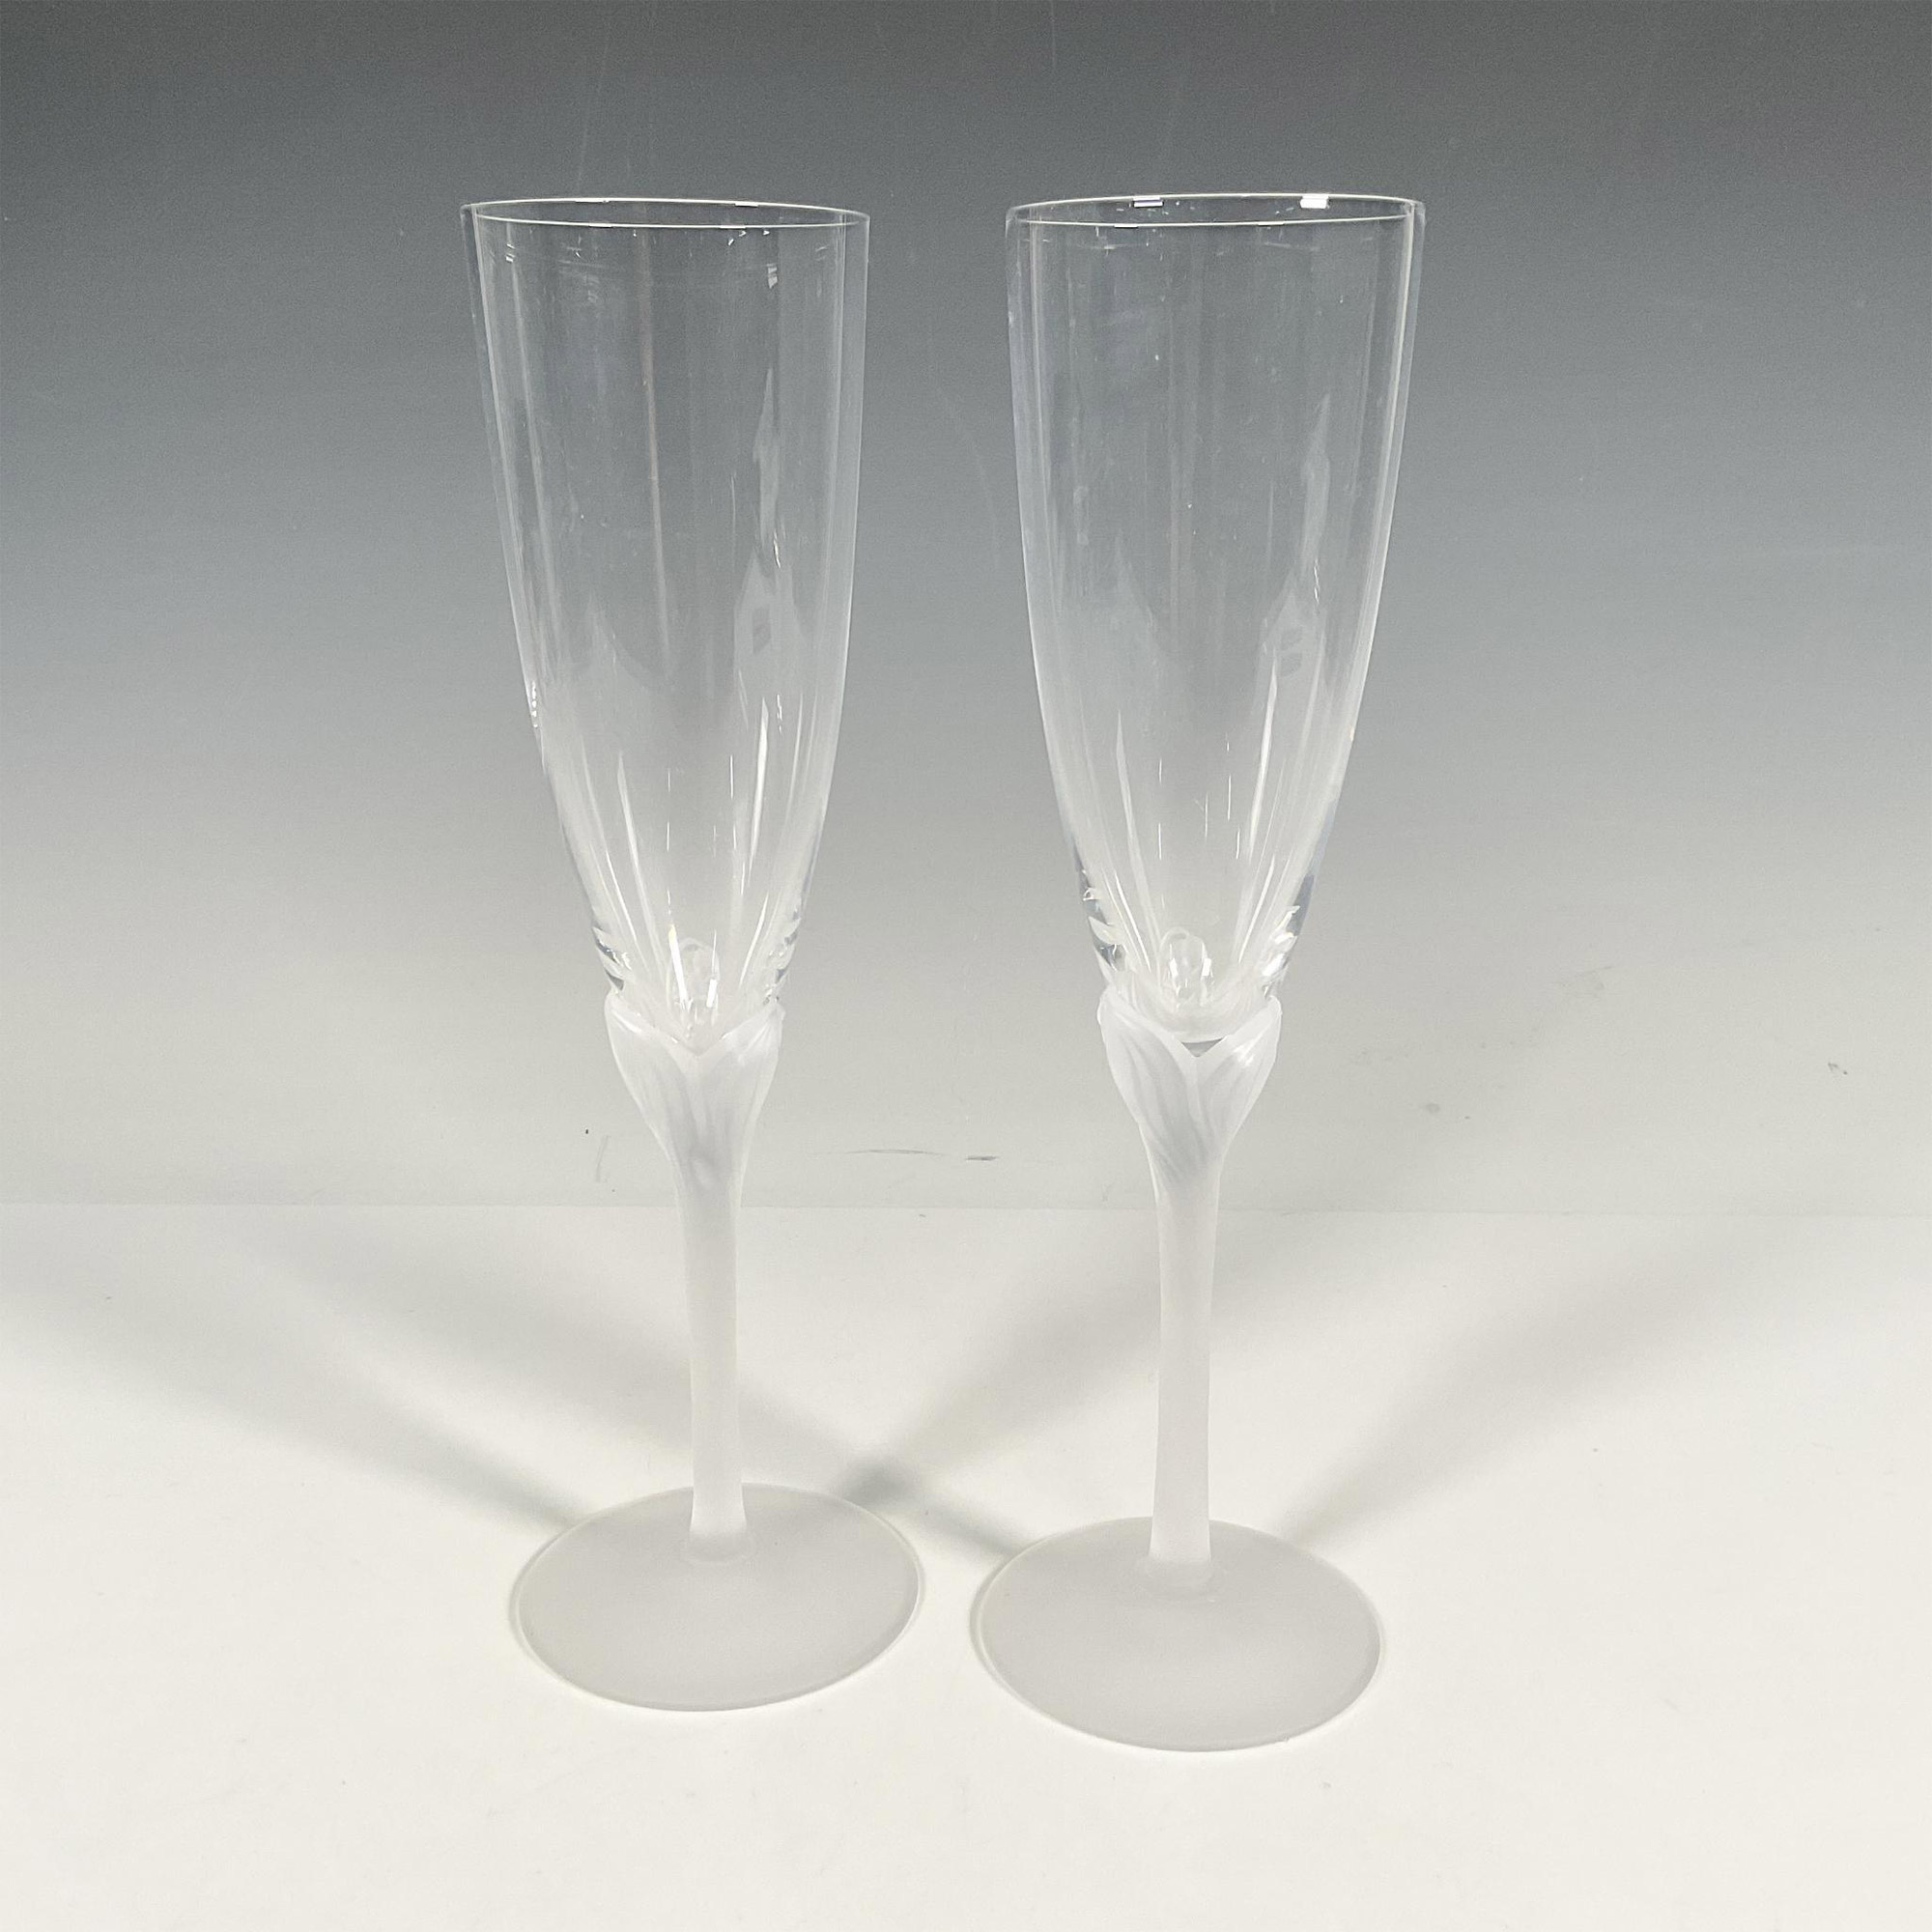 Pair of Crystal Amaryllis Champagne Glasses - Image 2 of 3